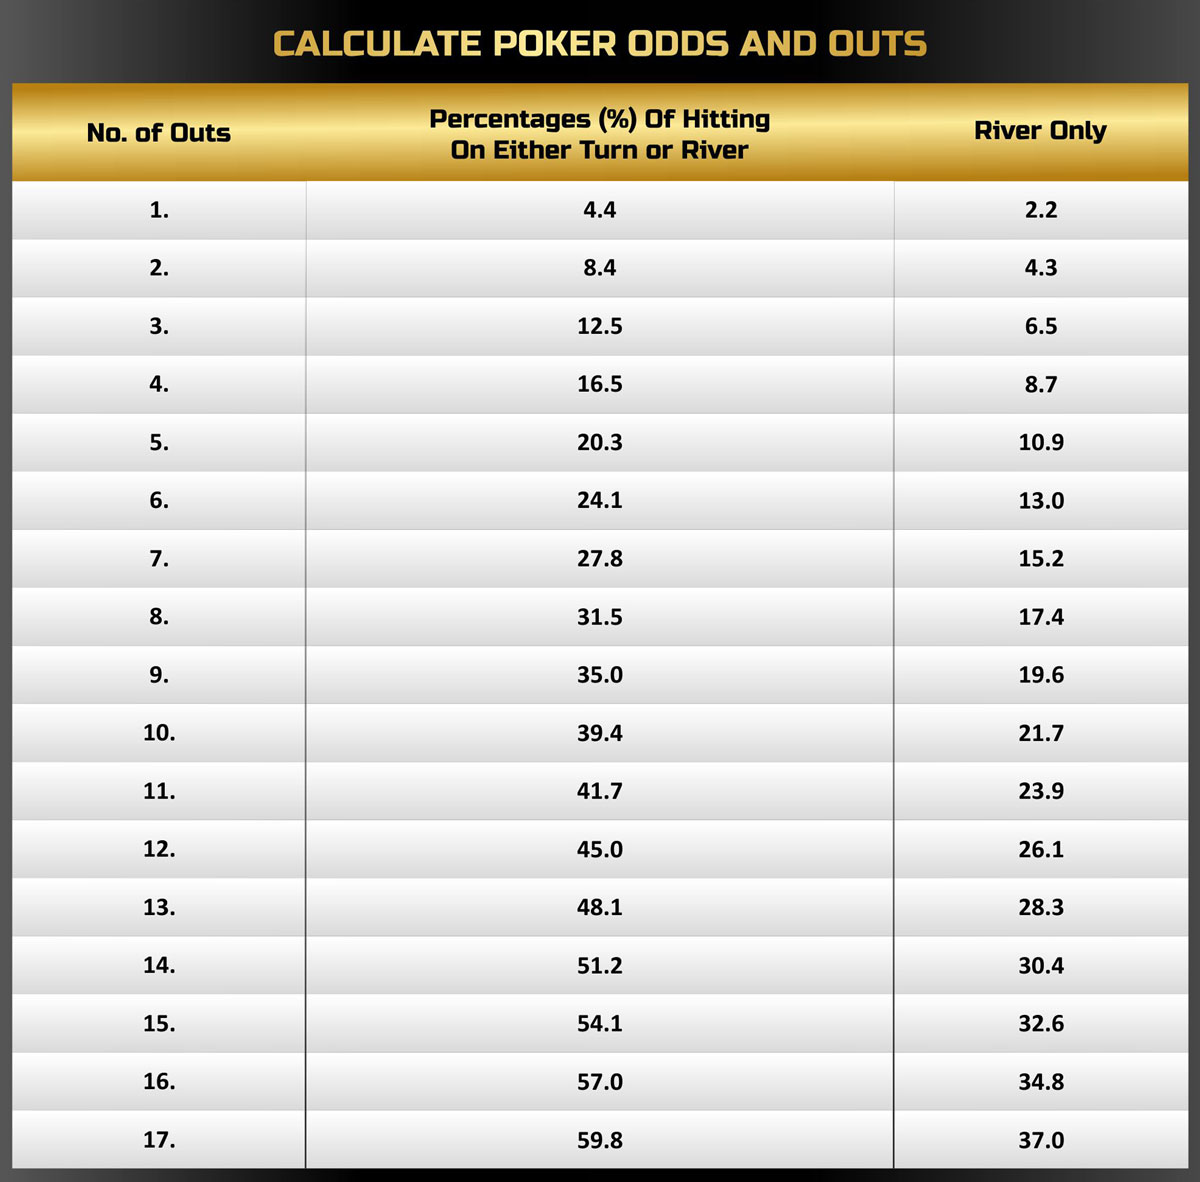 Calculate Poker Odds and Outs